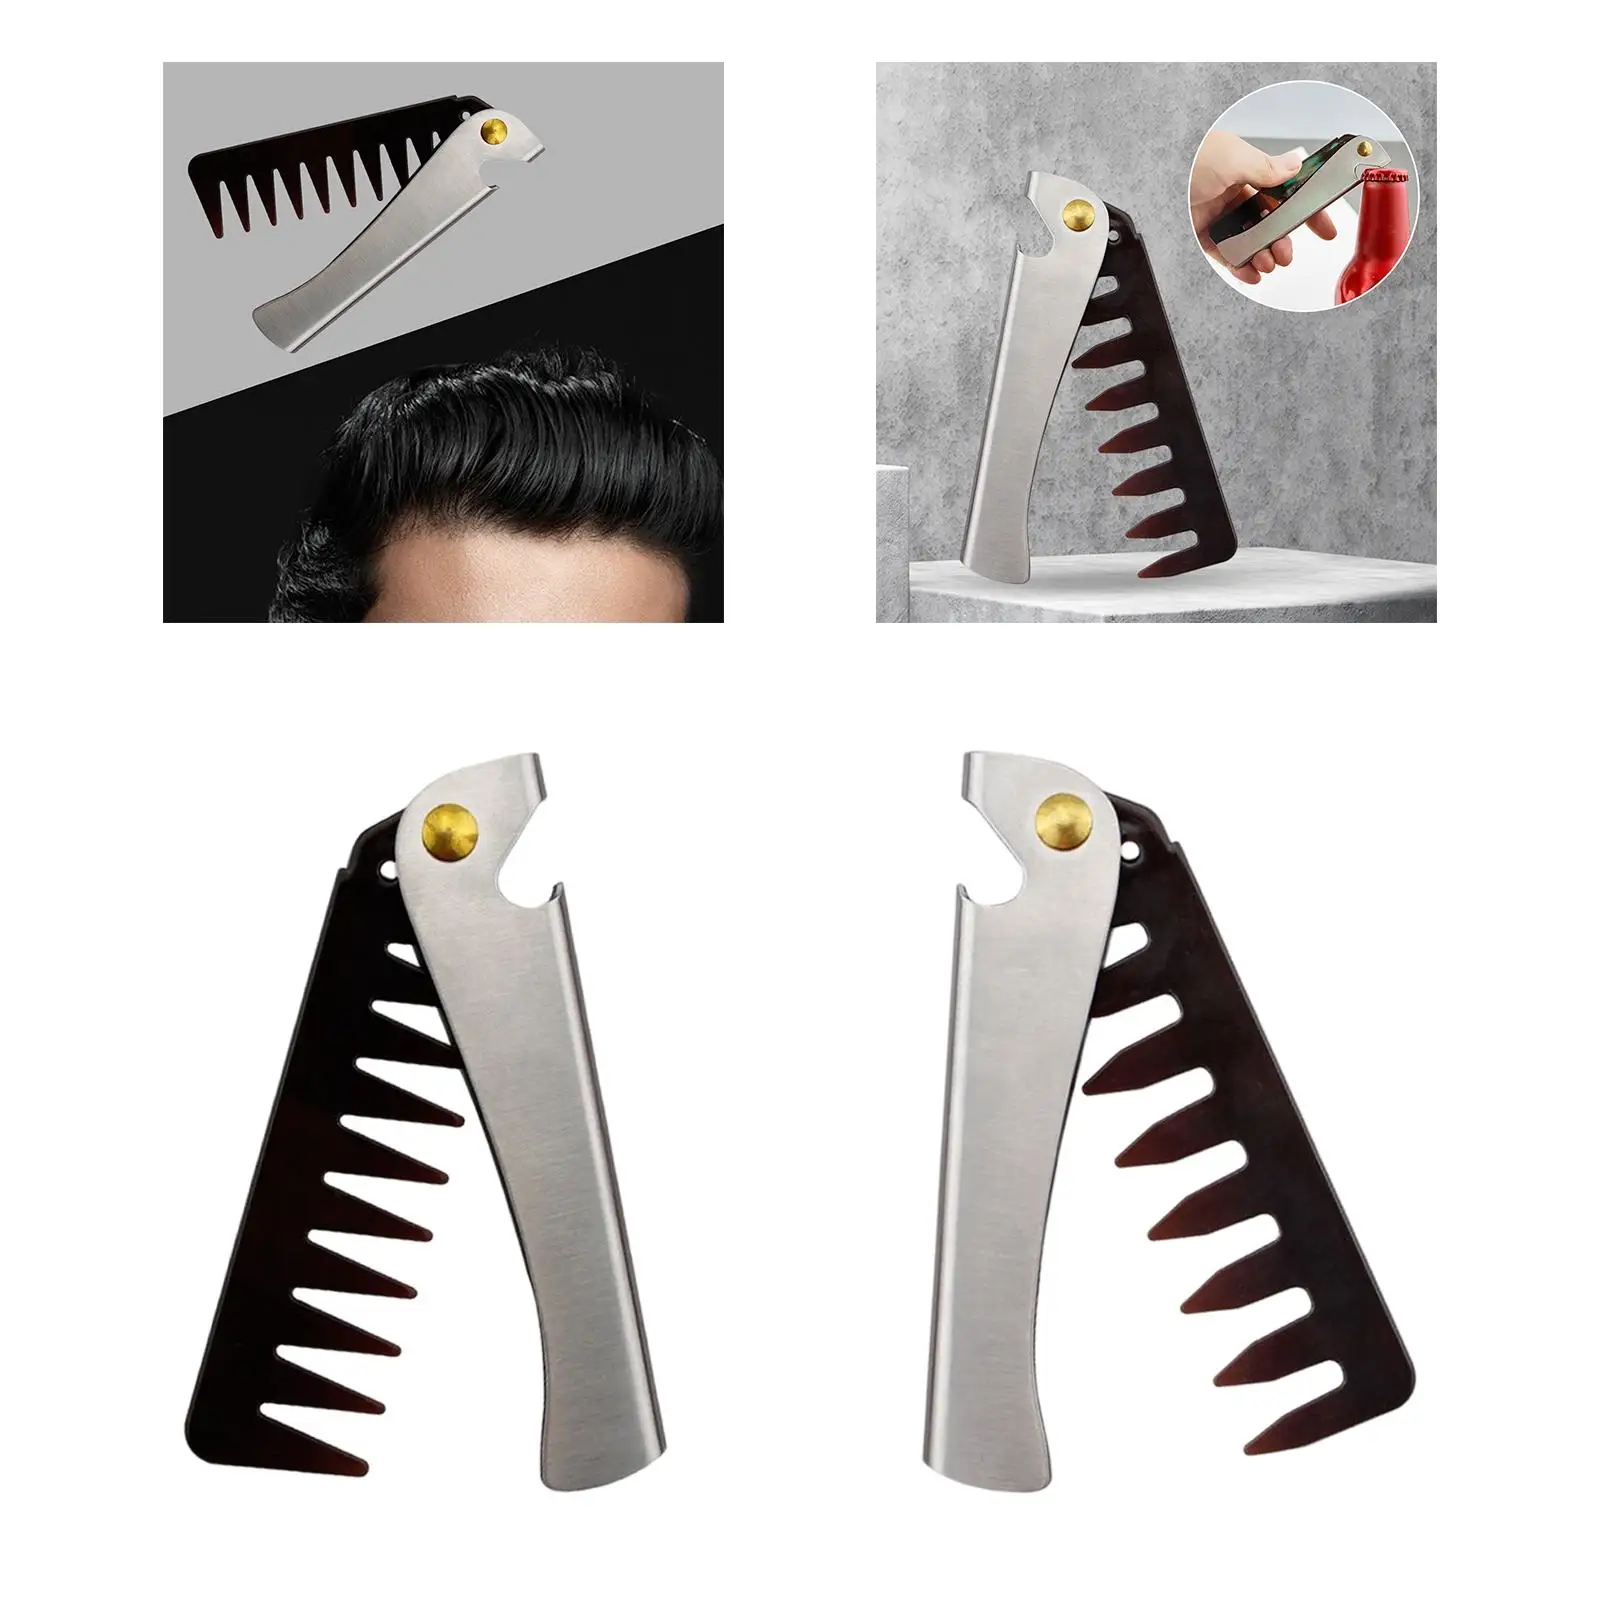 Folding Beard Comb for Men Stainless Steel Gift Grooming Combing Hair Pocket Comb for Travel